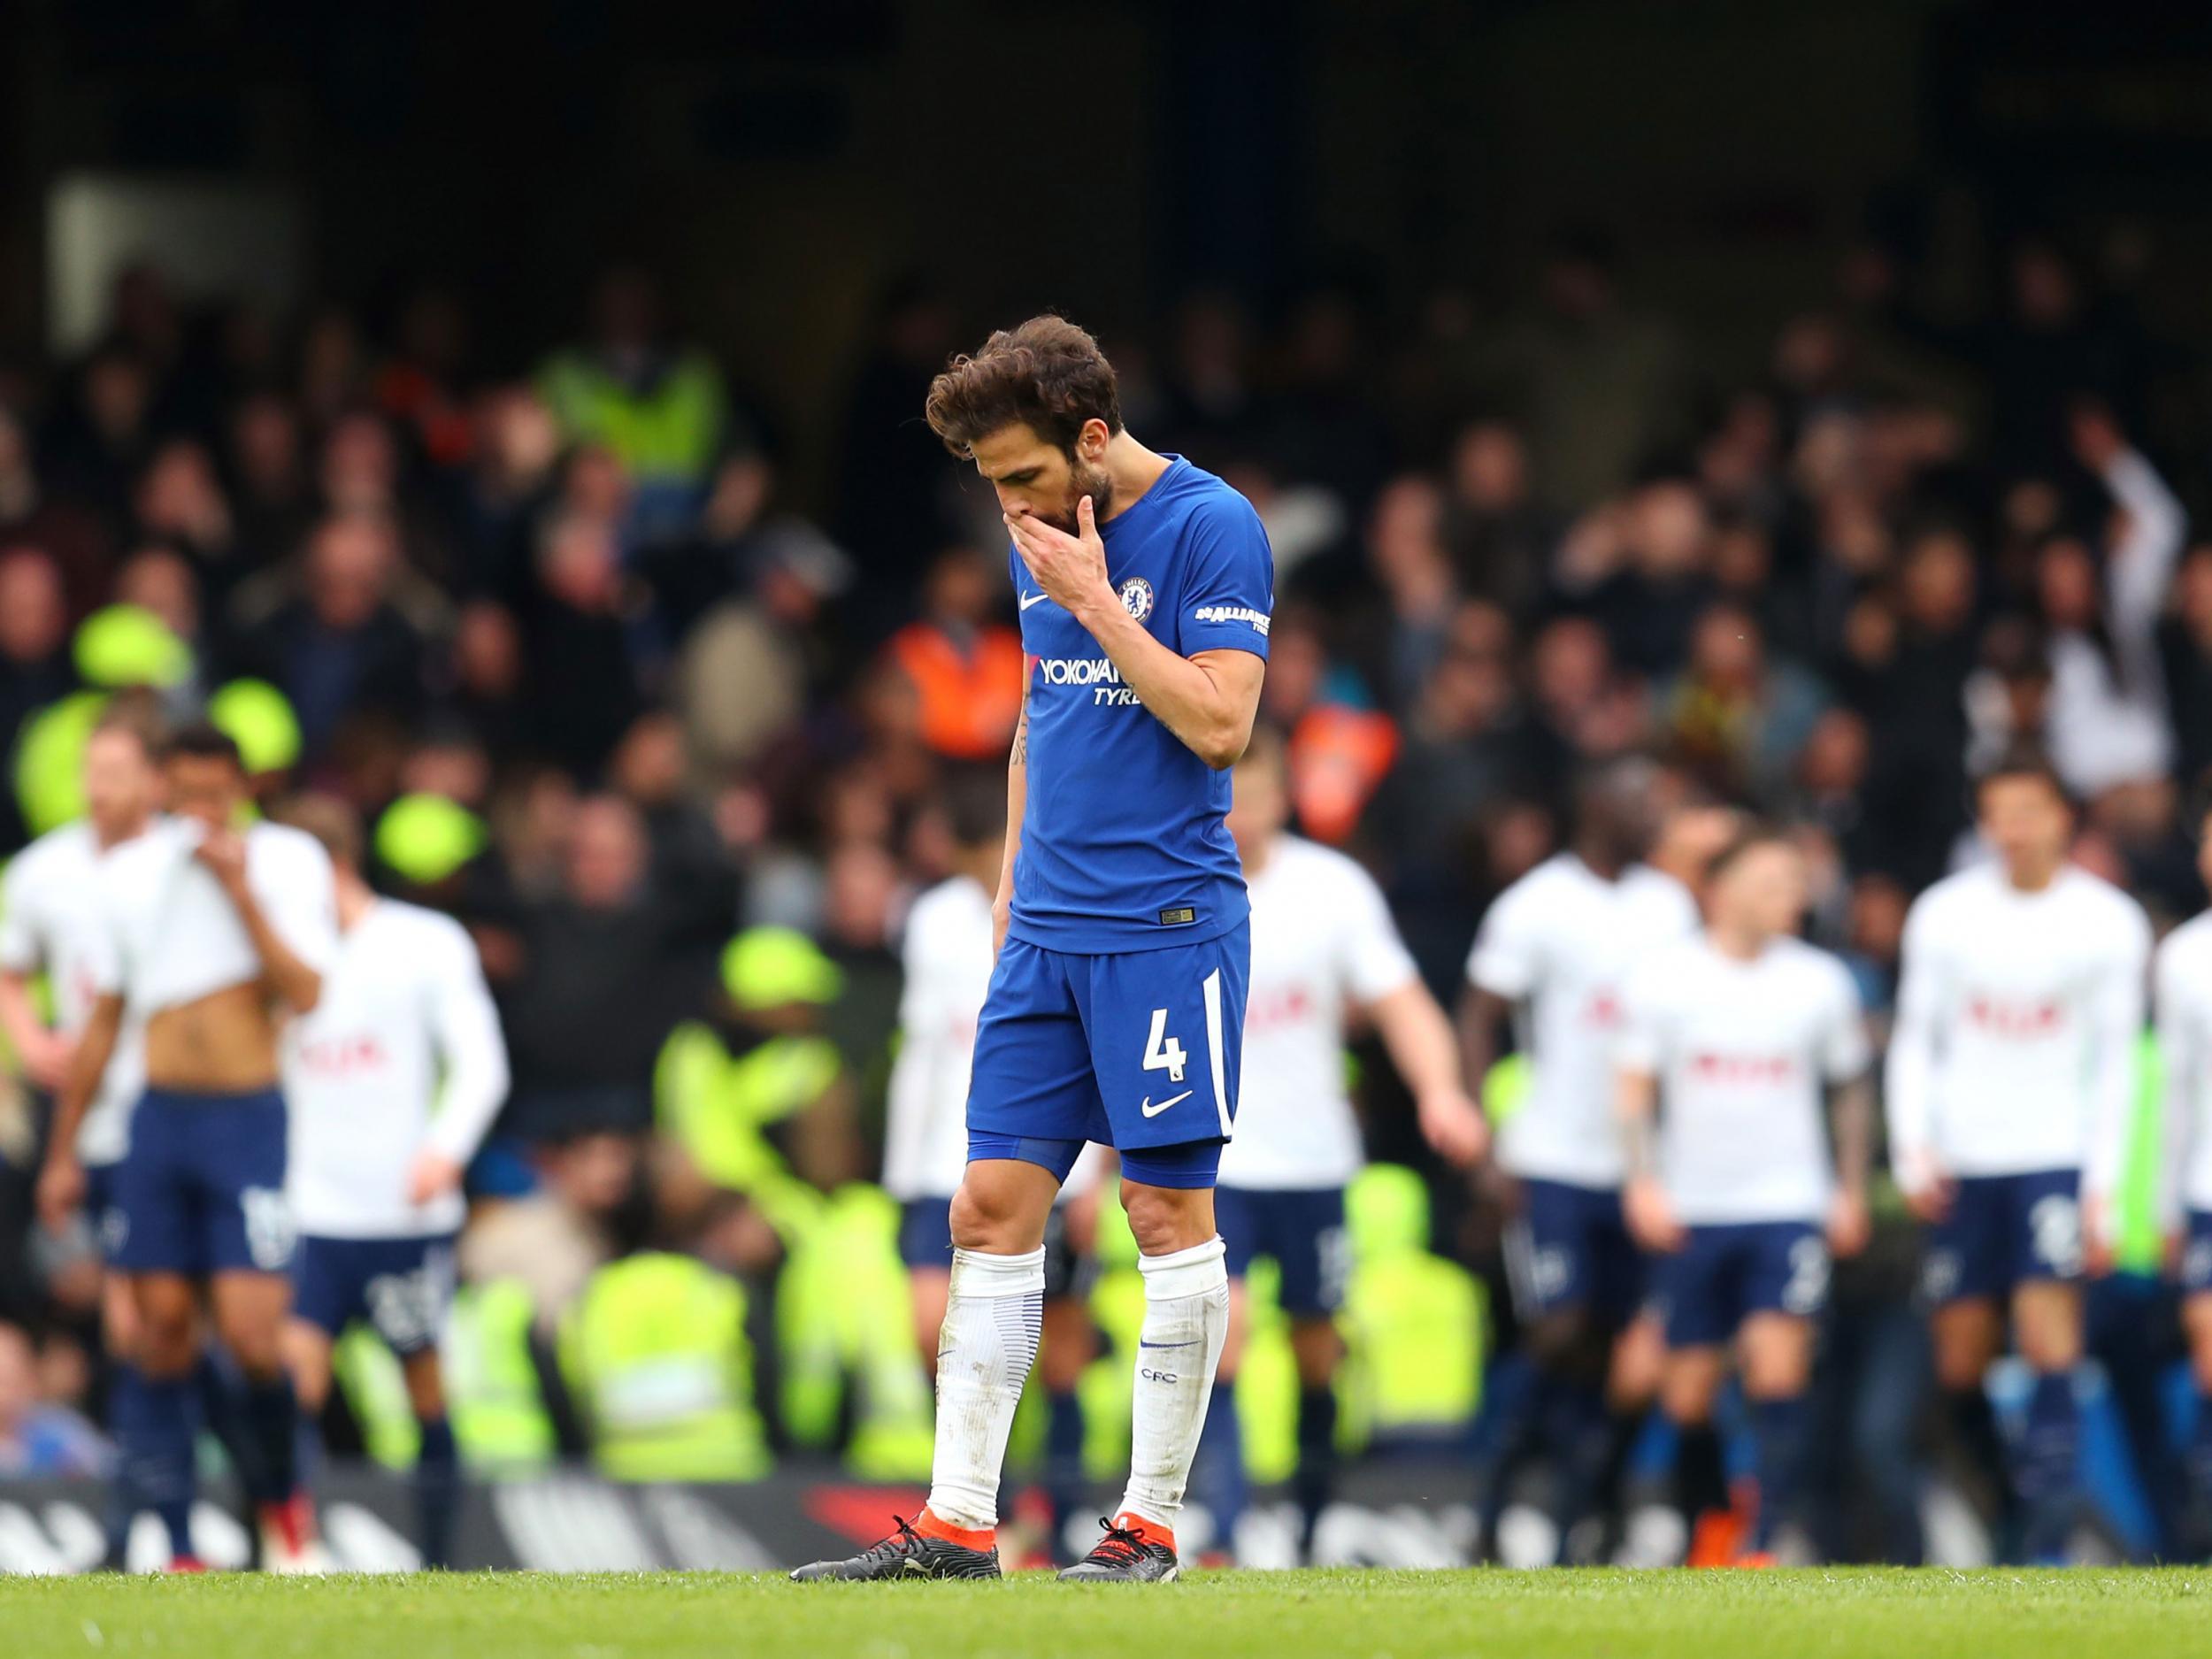 Chelsea's hopes of making the top four now look bleak